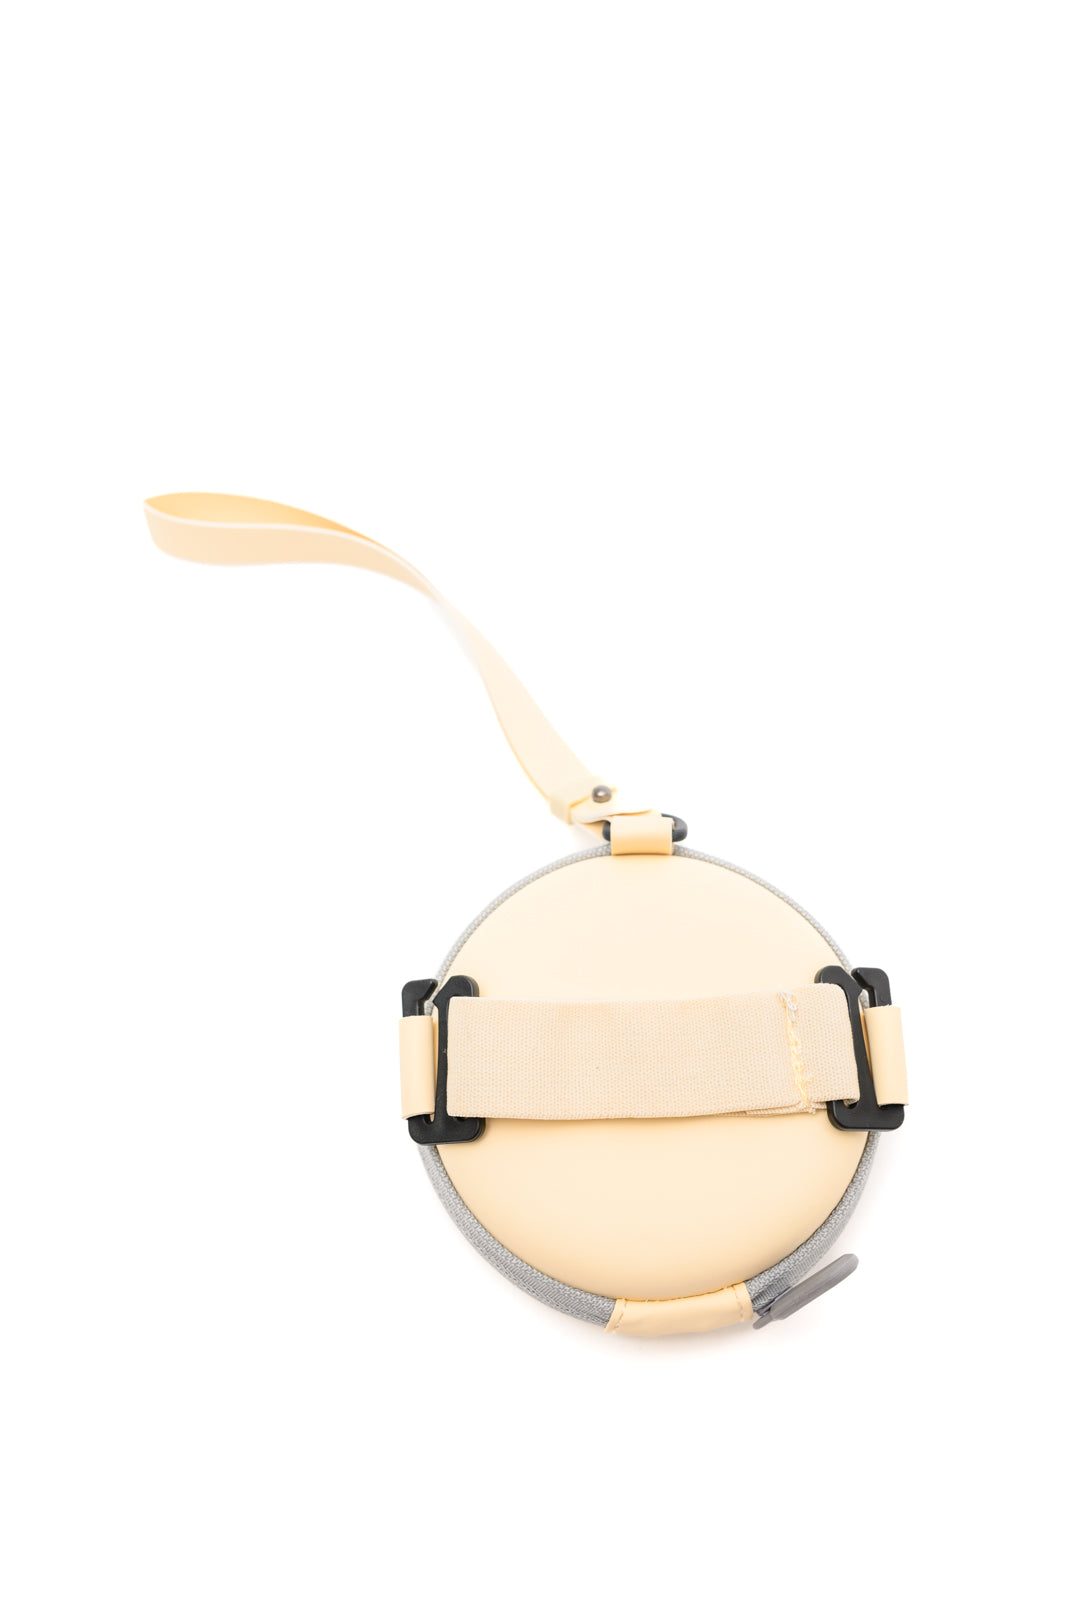 Collapsible Sunnies & Case in Champagne